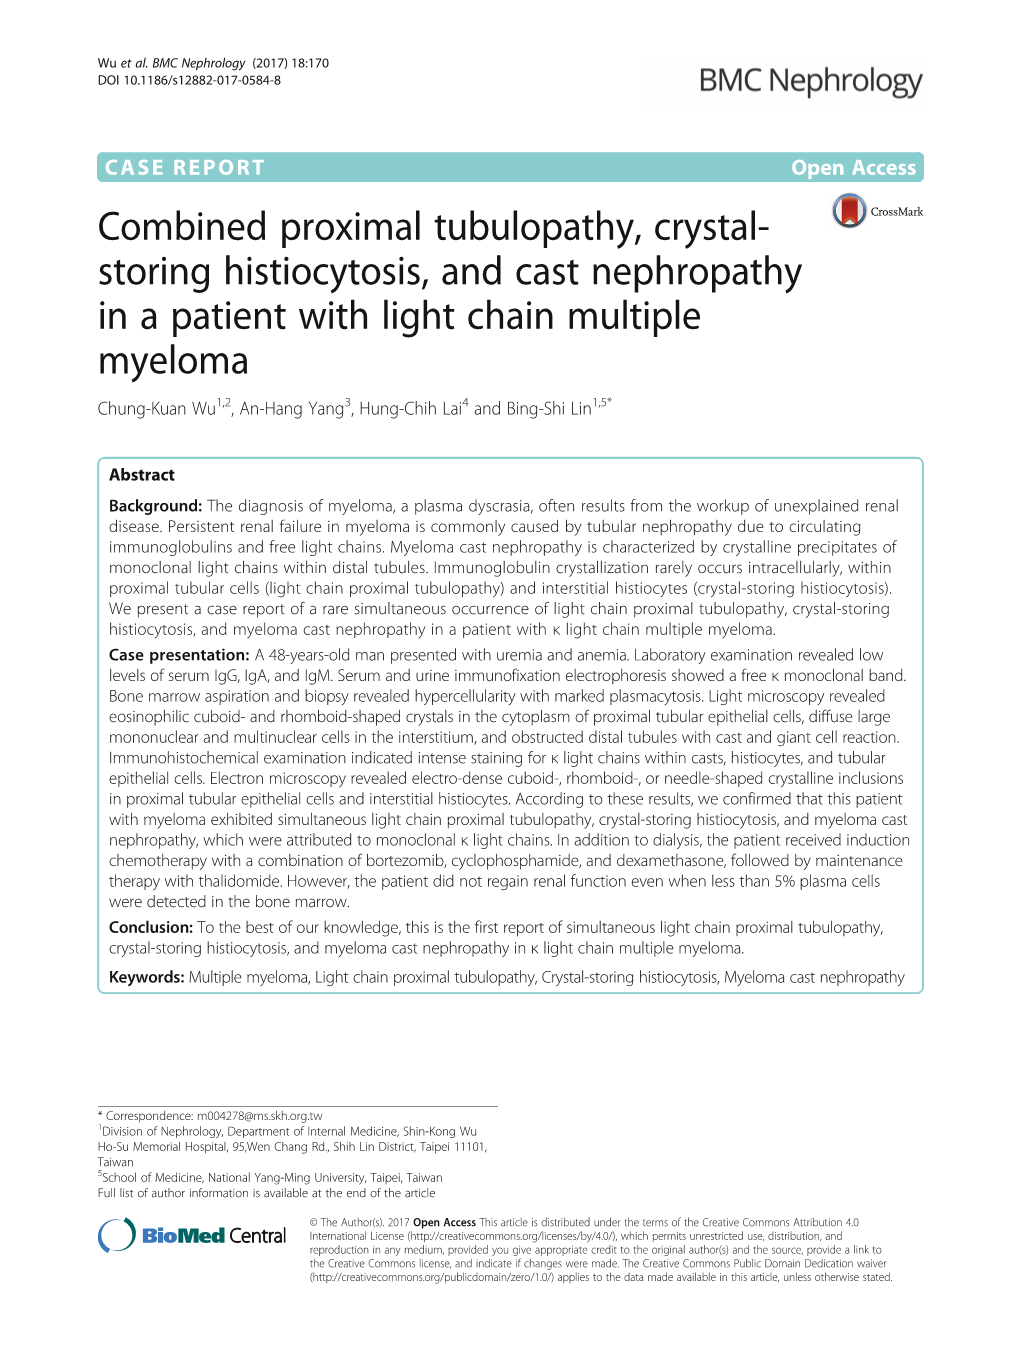 Combined Proximal Tubulopathy, Crystal-Storing Histiocytosis, And